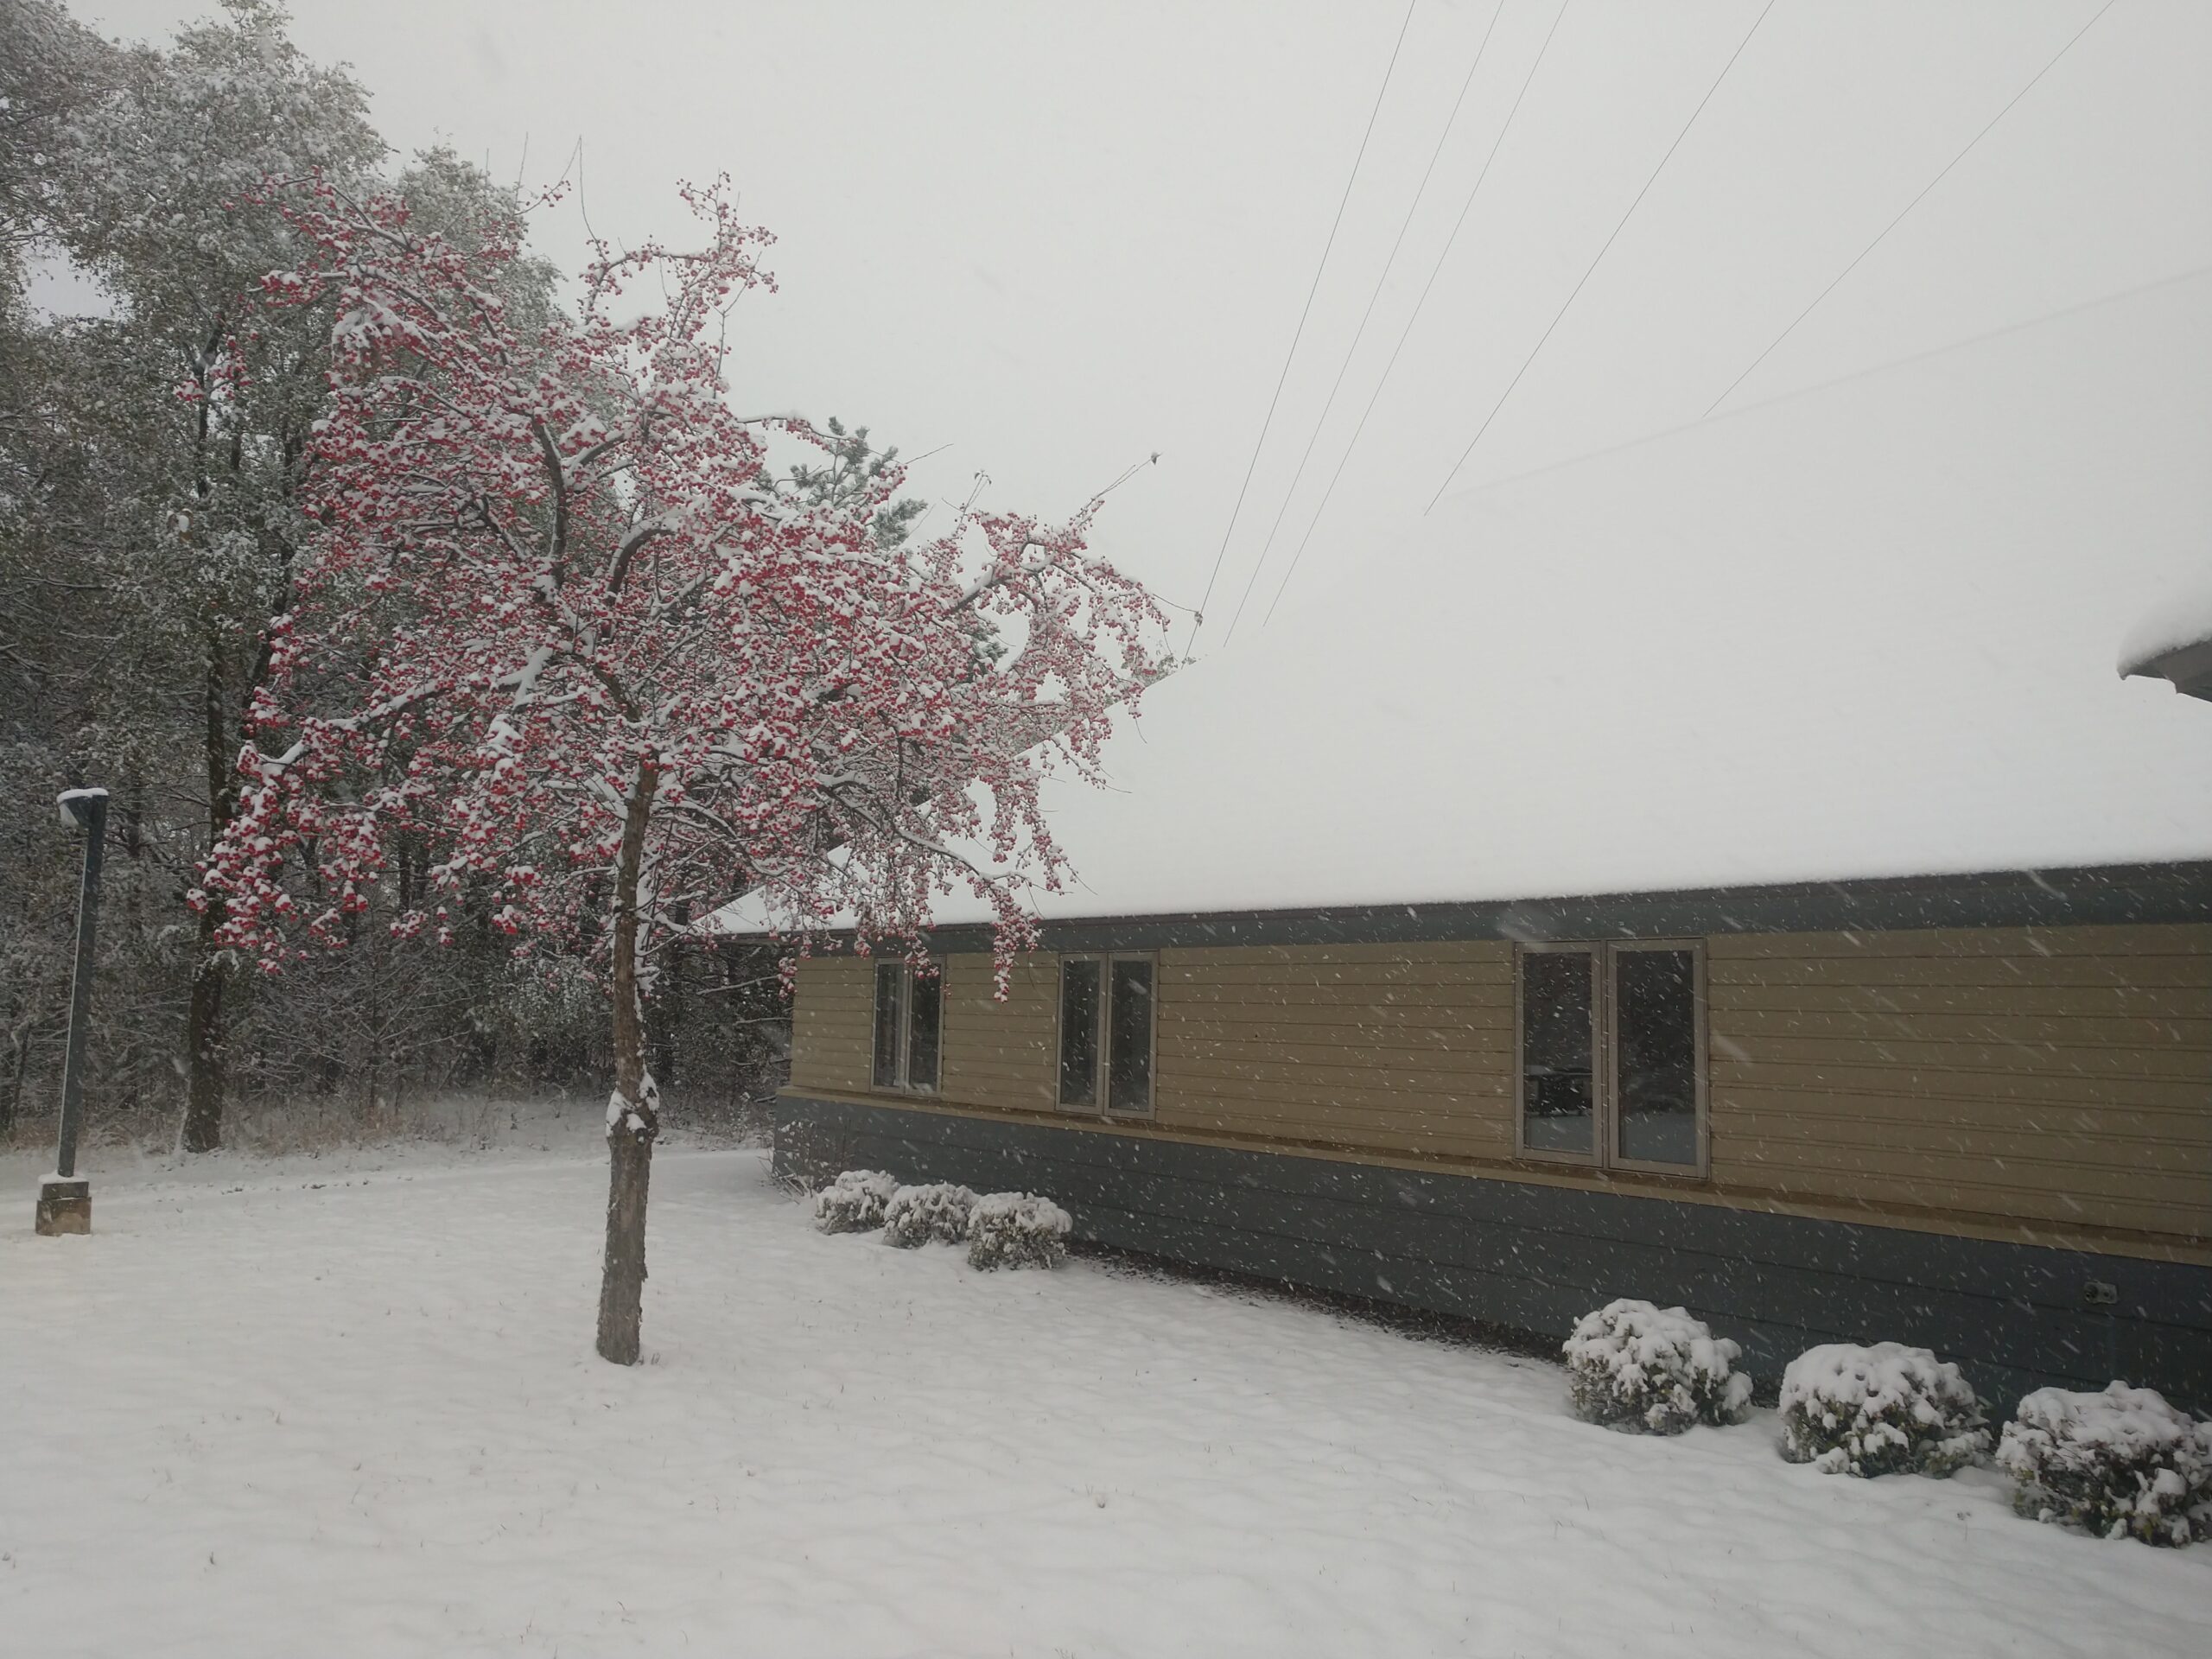 The ground, foliage and roof are lightly snow covered in front of a brown, one story building/